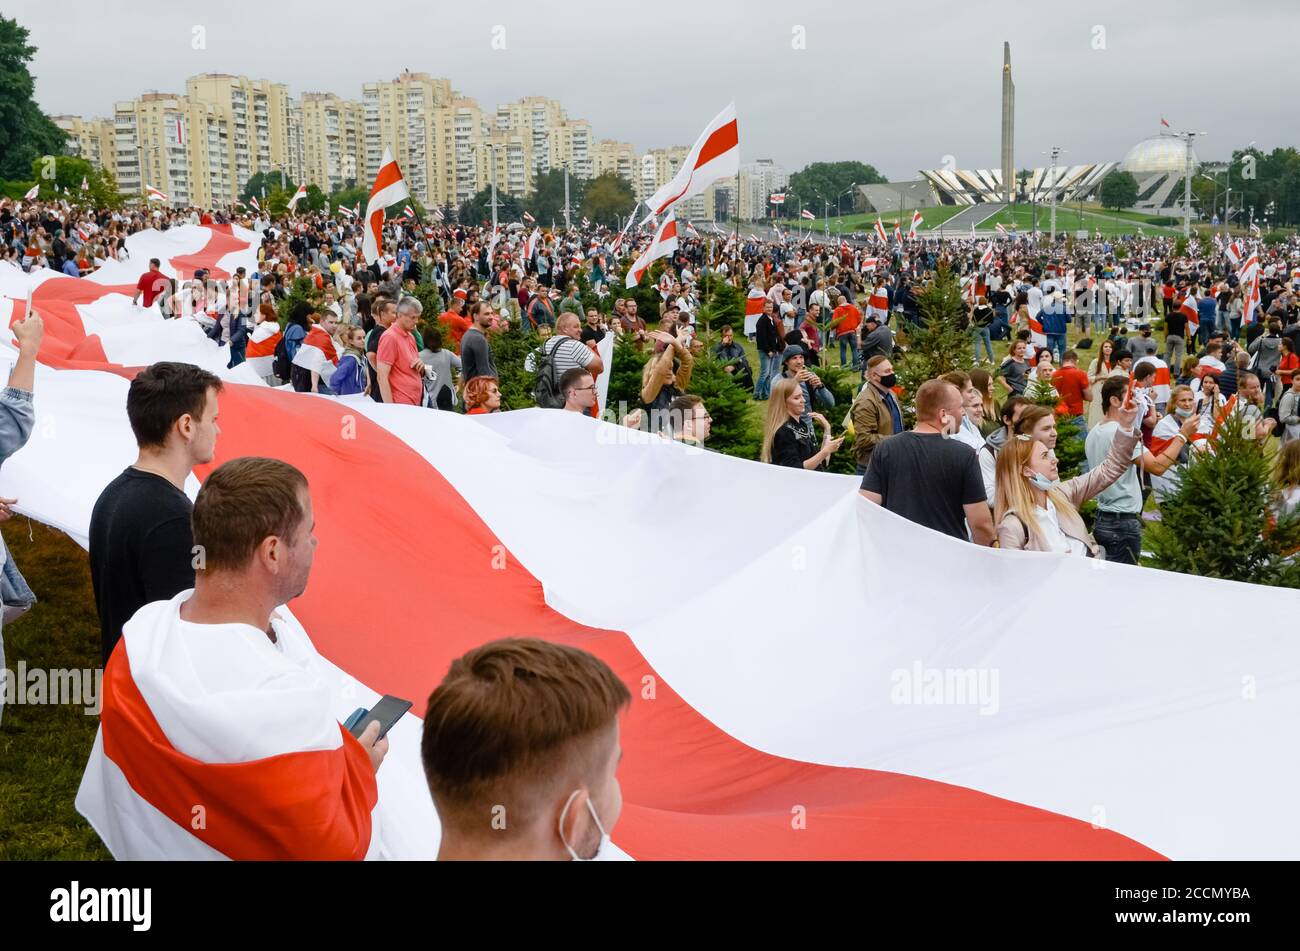 Minsk, Belarus - August 16, 2020: Belarusian people participate in peaceful protest after presidential elections in Belarus Stock Photo